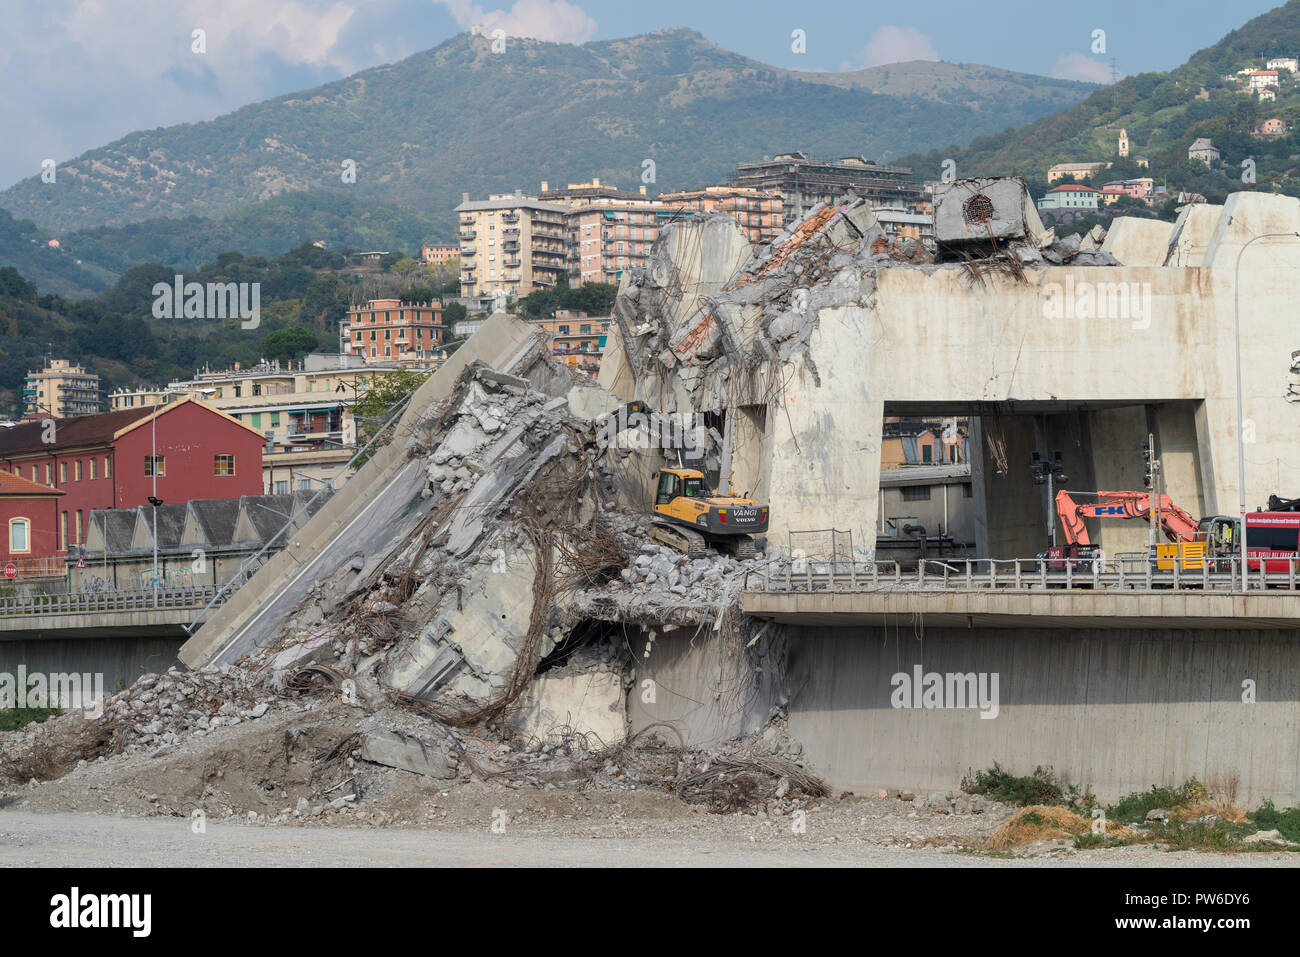 The remains after a section collapse of the Morandi Bridge, Genoa, Italy Stock Photo